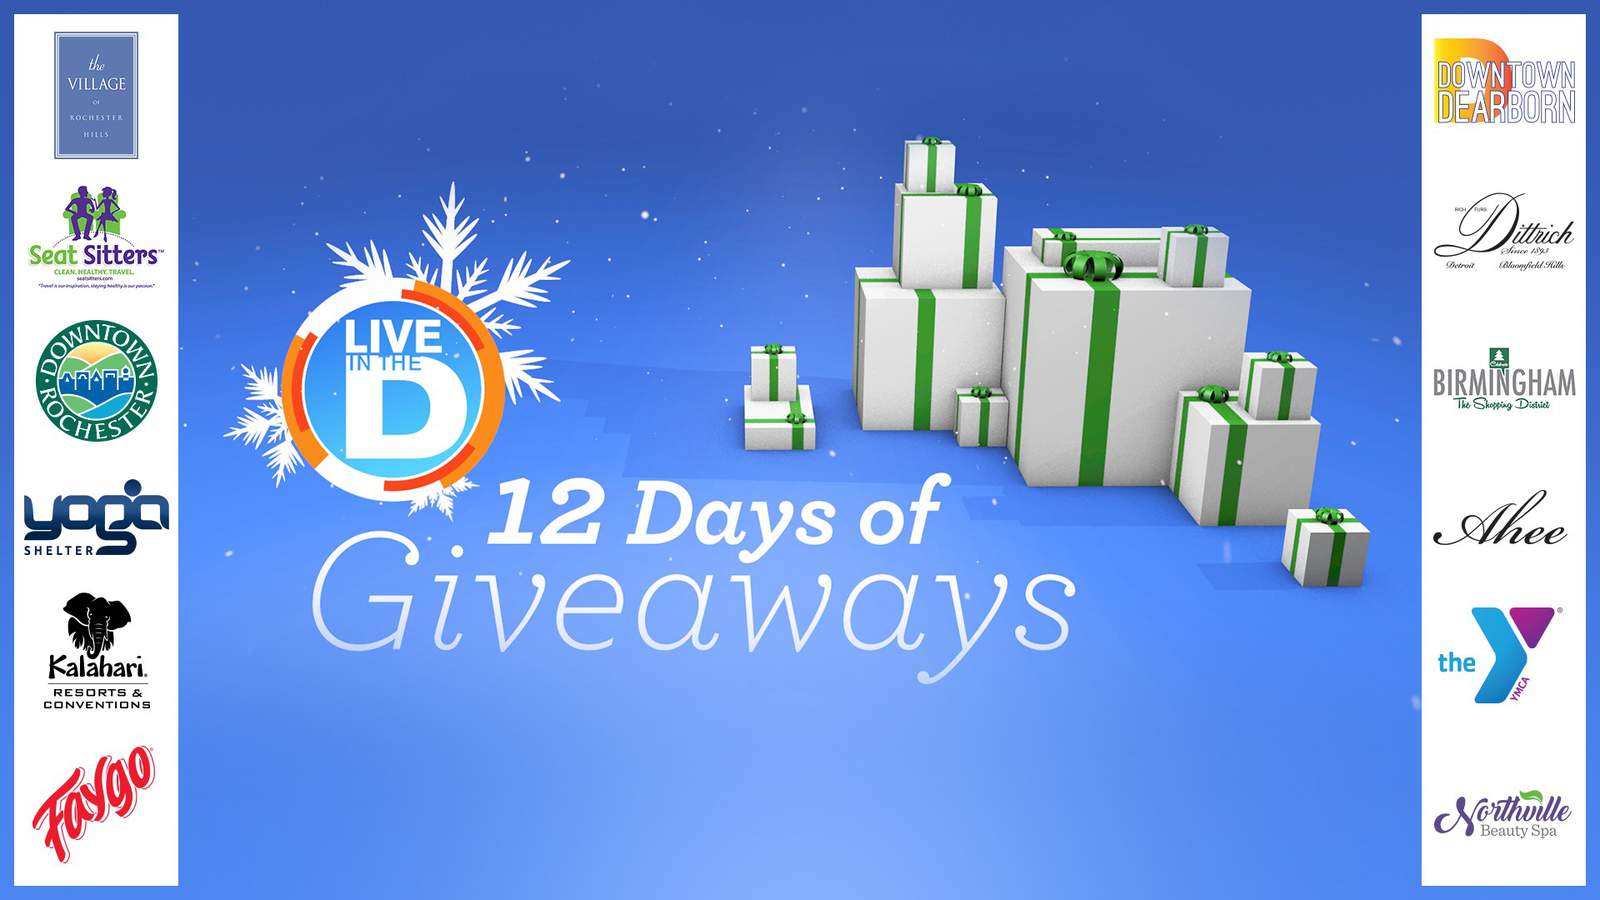 Enter to win Live In The D’s 12 Days of Christmas Giveaway 2019